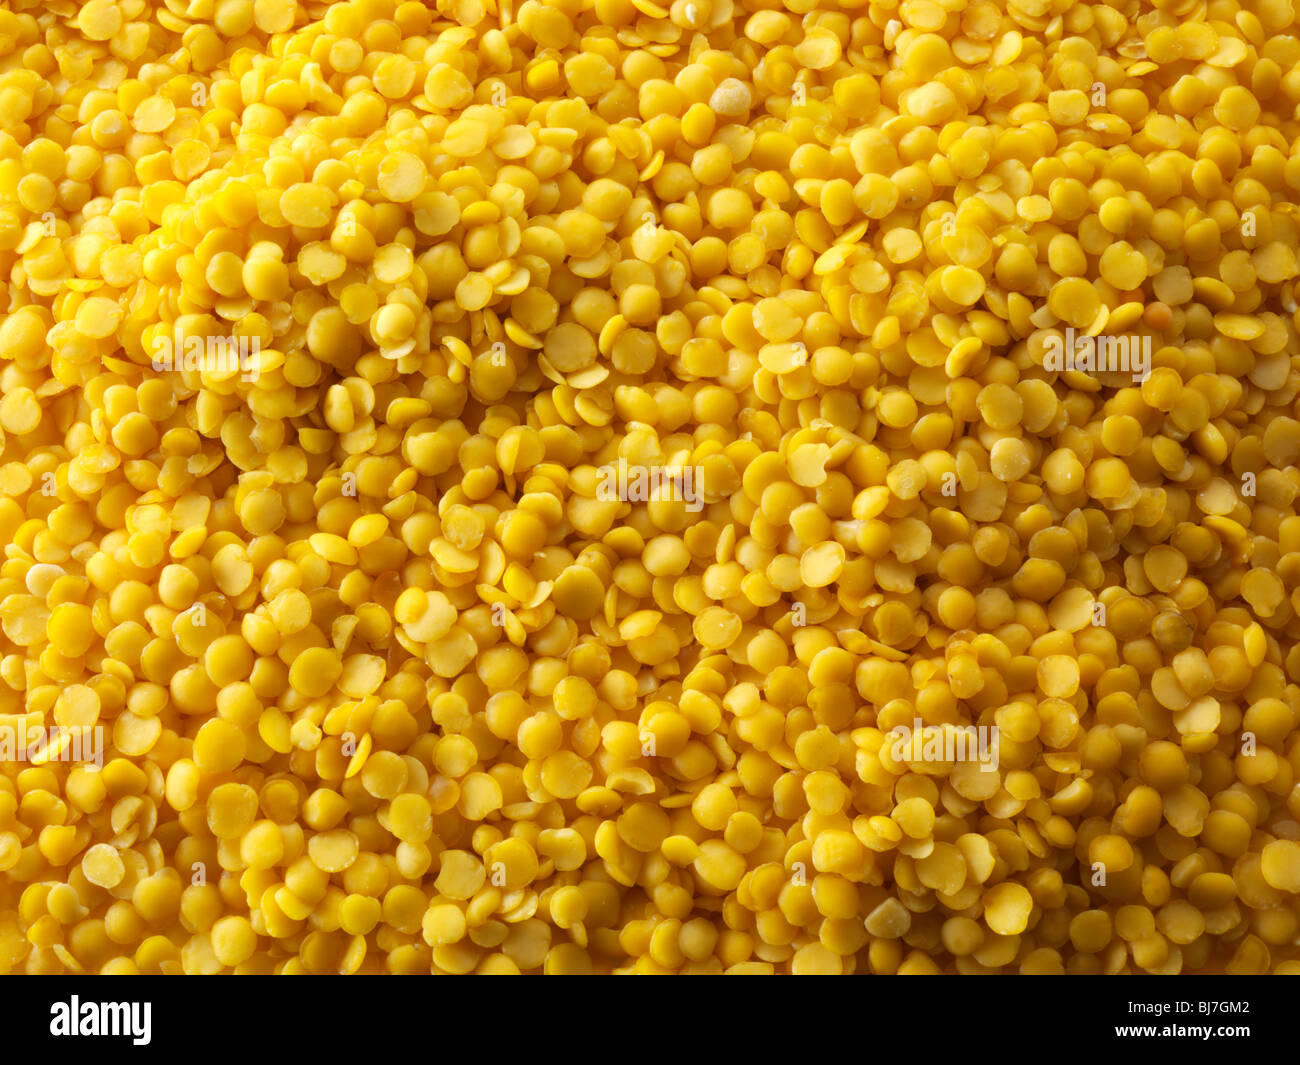 Whole dried yellow lentil beans - close up full frame top shot. Stock Photo